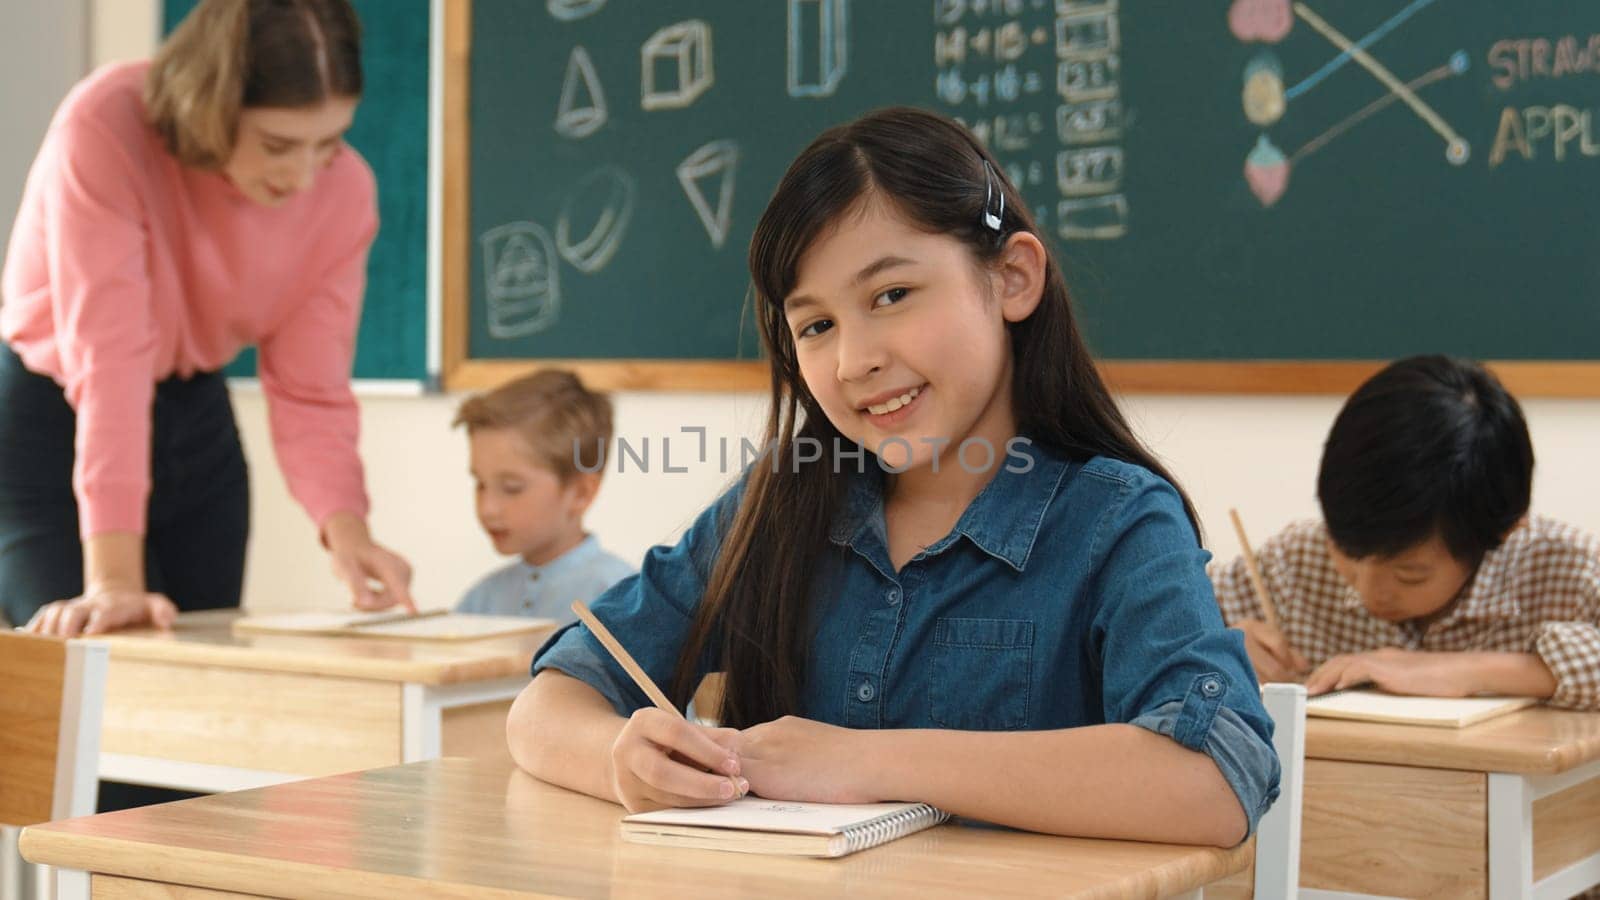 Asian girl writing test or classwork while looking at camera at classroom. Diverse happy student taking notes and teacher help caucasian boy doing test while sitting in front of blackboard. Pedagogy.